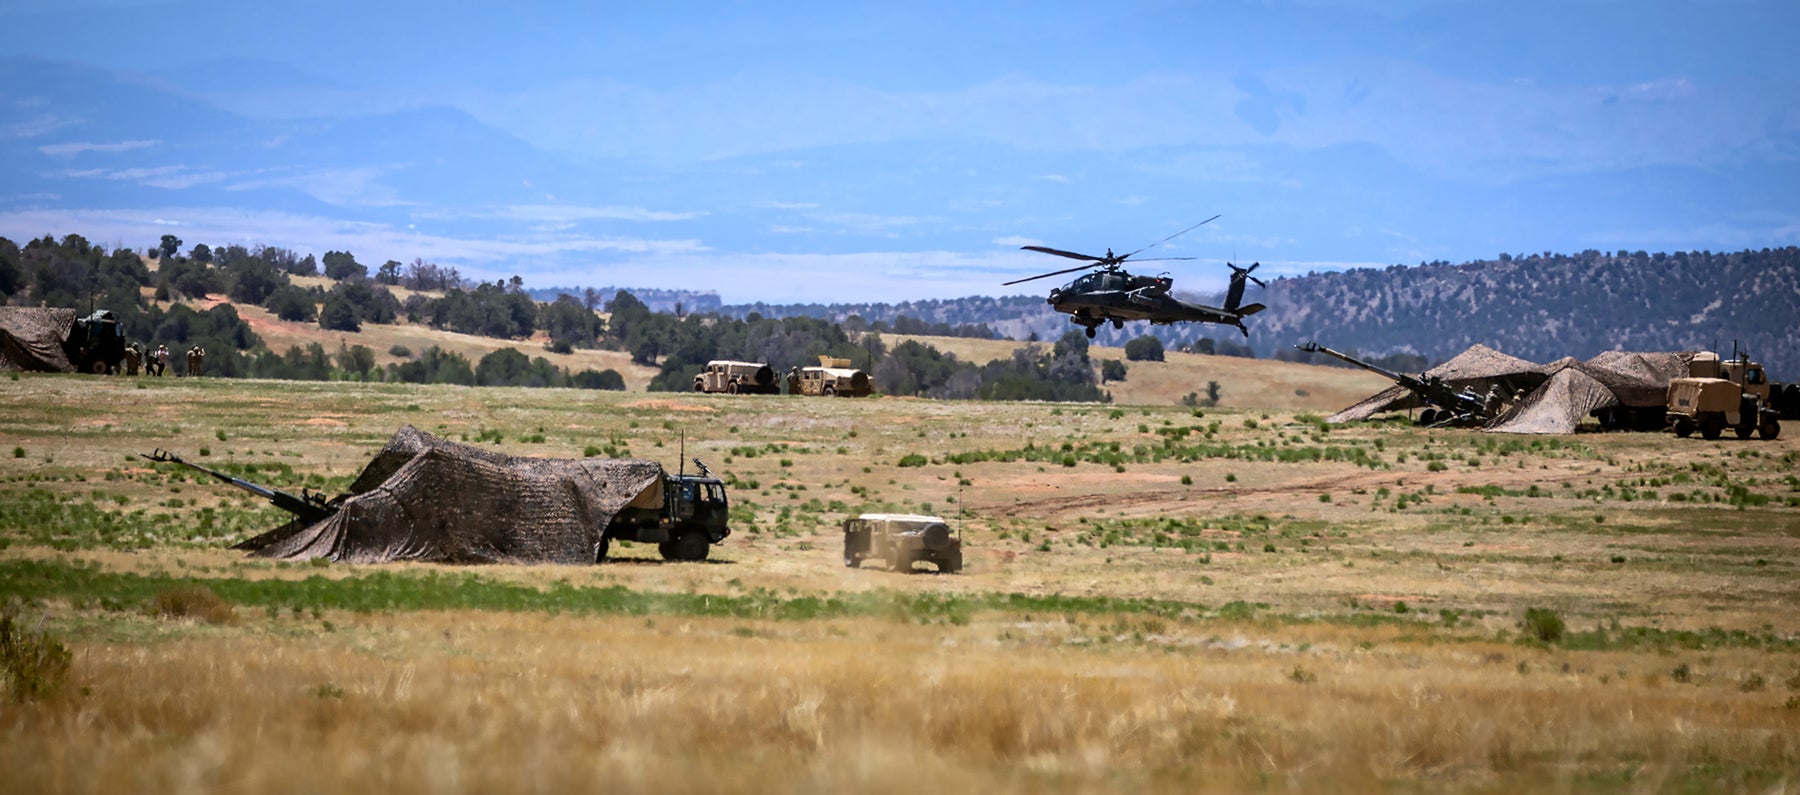 AH-64 Apache helicopters and field artillery work in concert during the 4th Infantry Division’s Ivy Mass exercise at Fort Carson, Colorado, in June. (Credit: U.S. Army/Capt. Alexander Warden) 